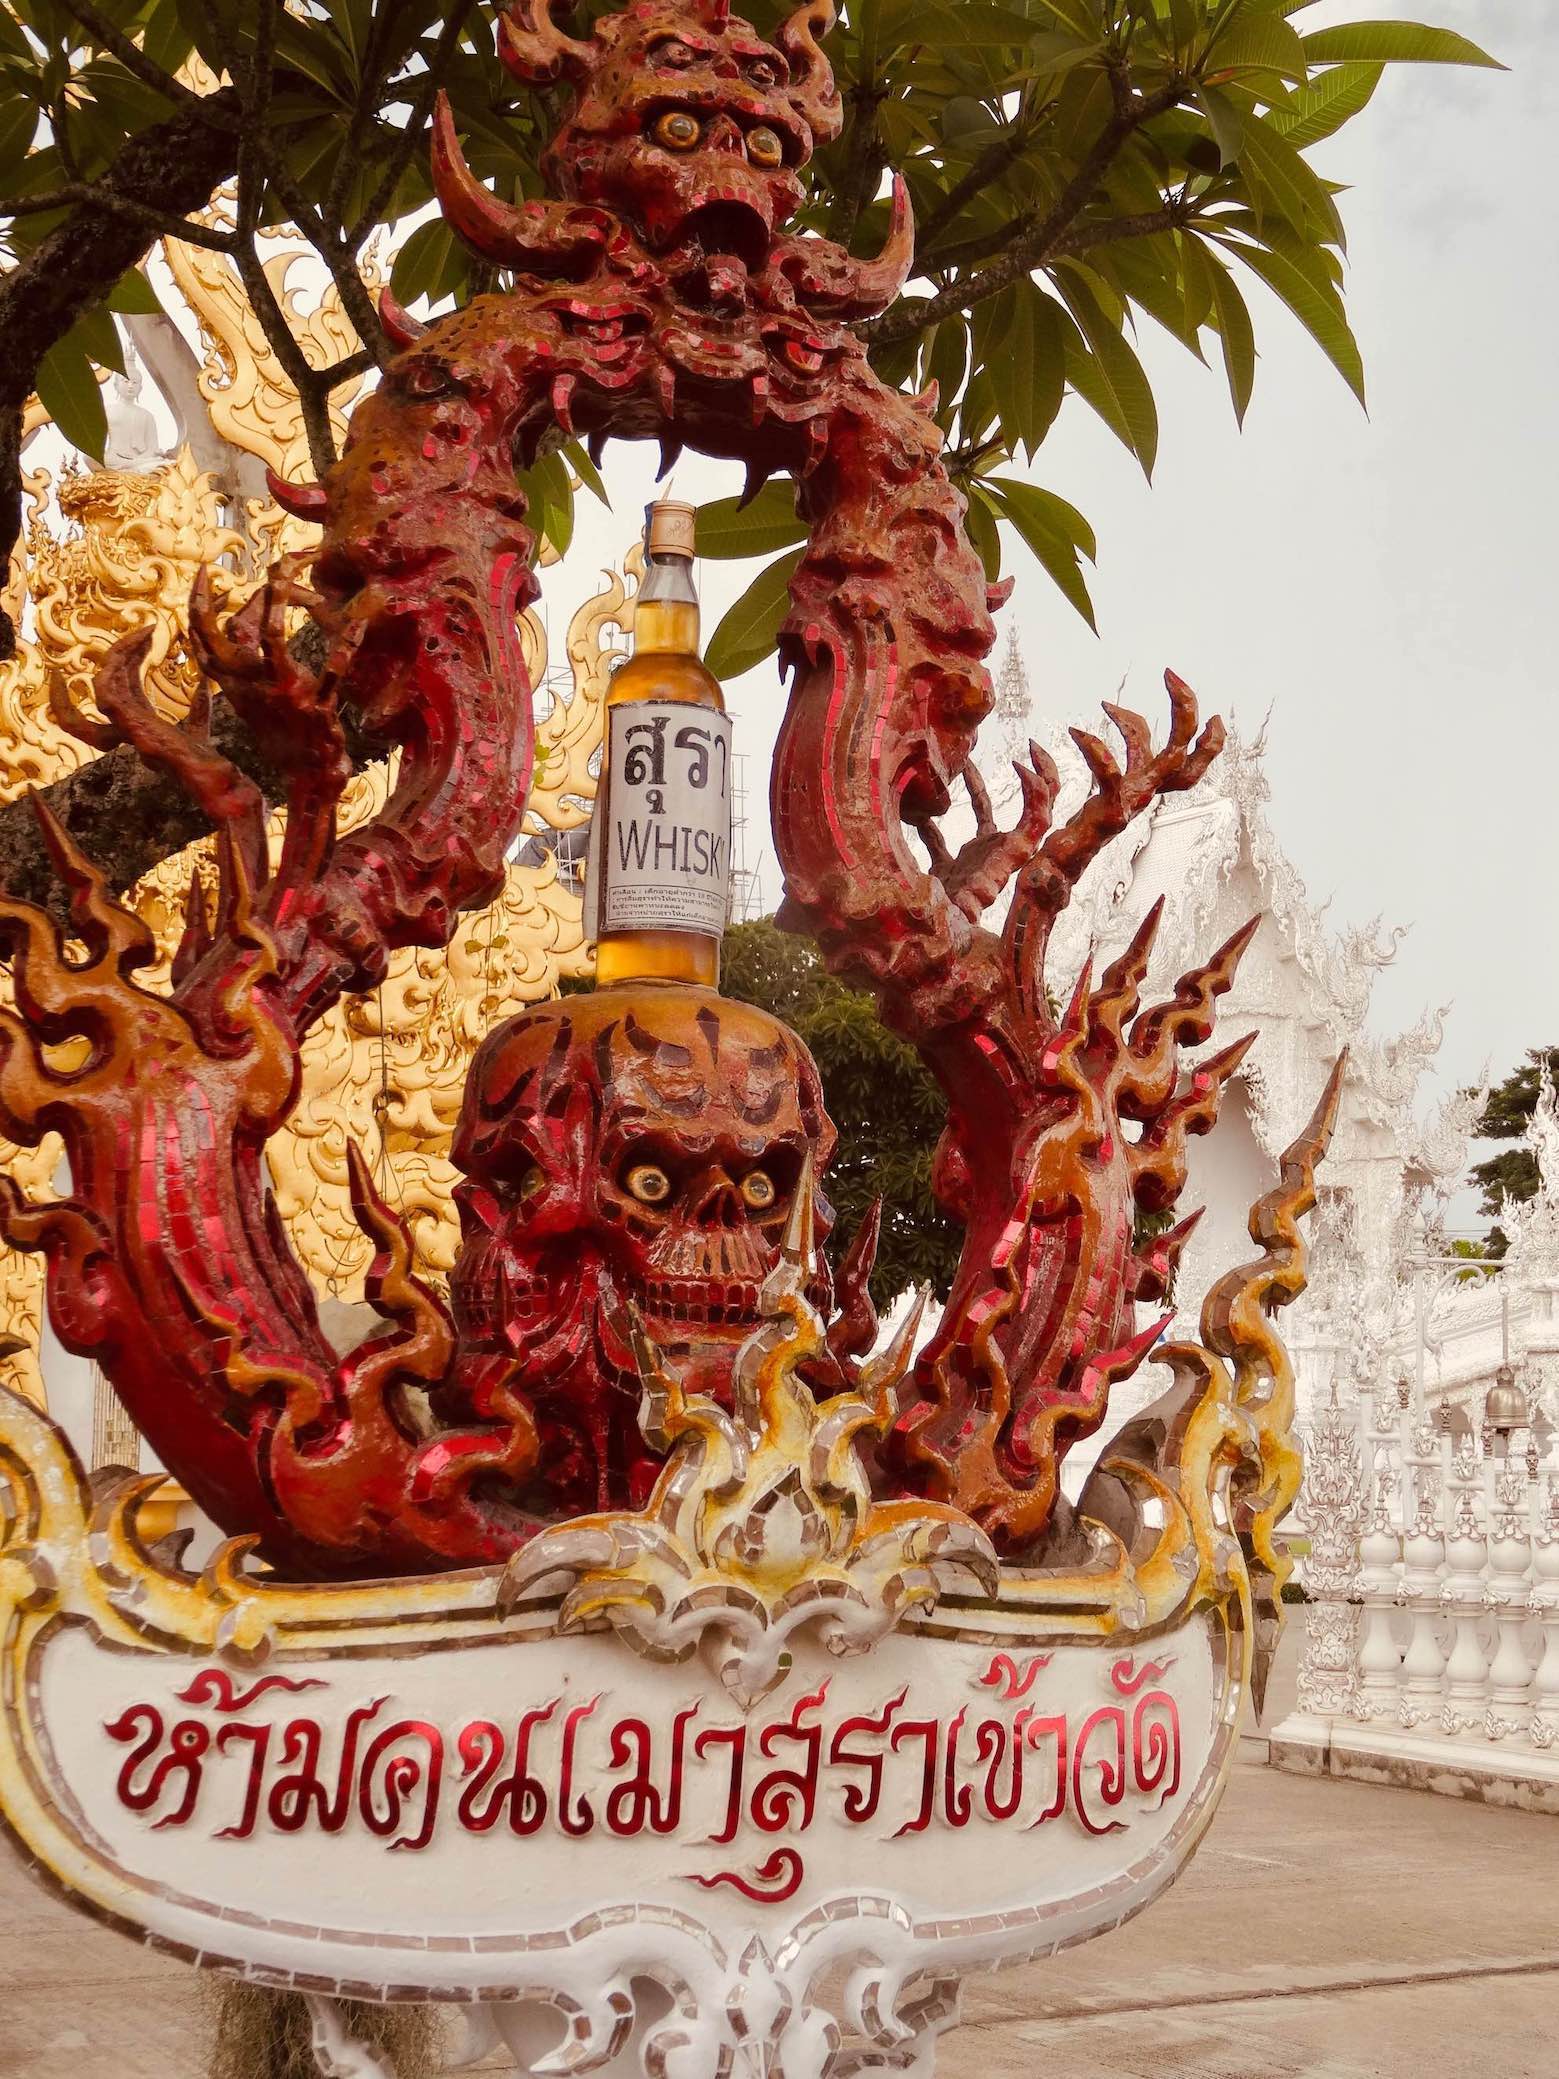 Death skull with whisky at Chiang Rai's White Temple